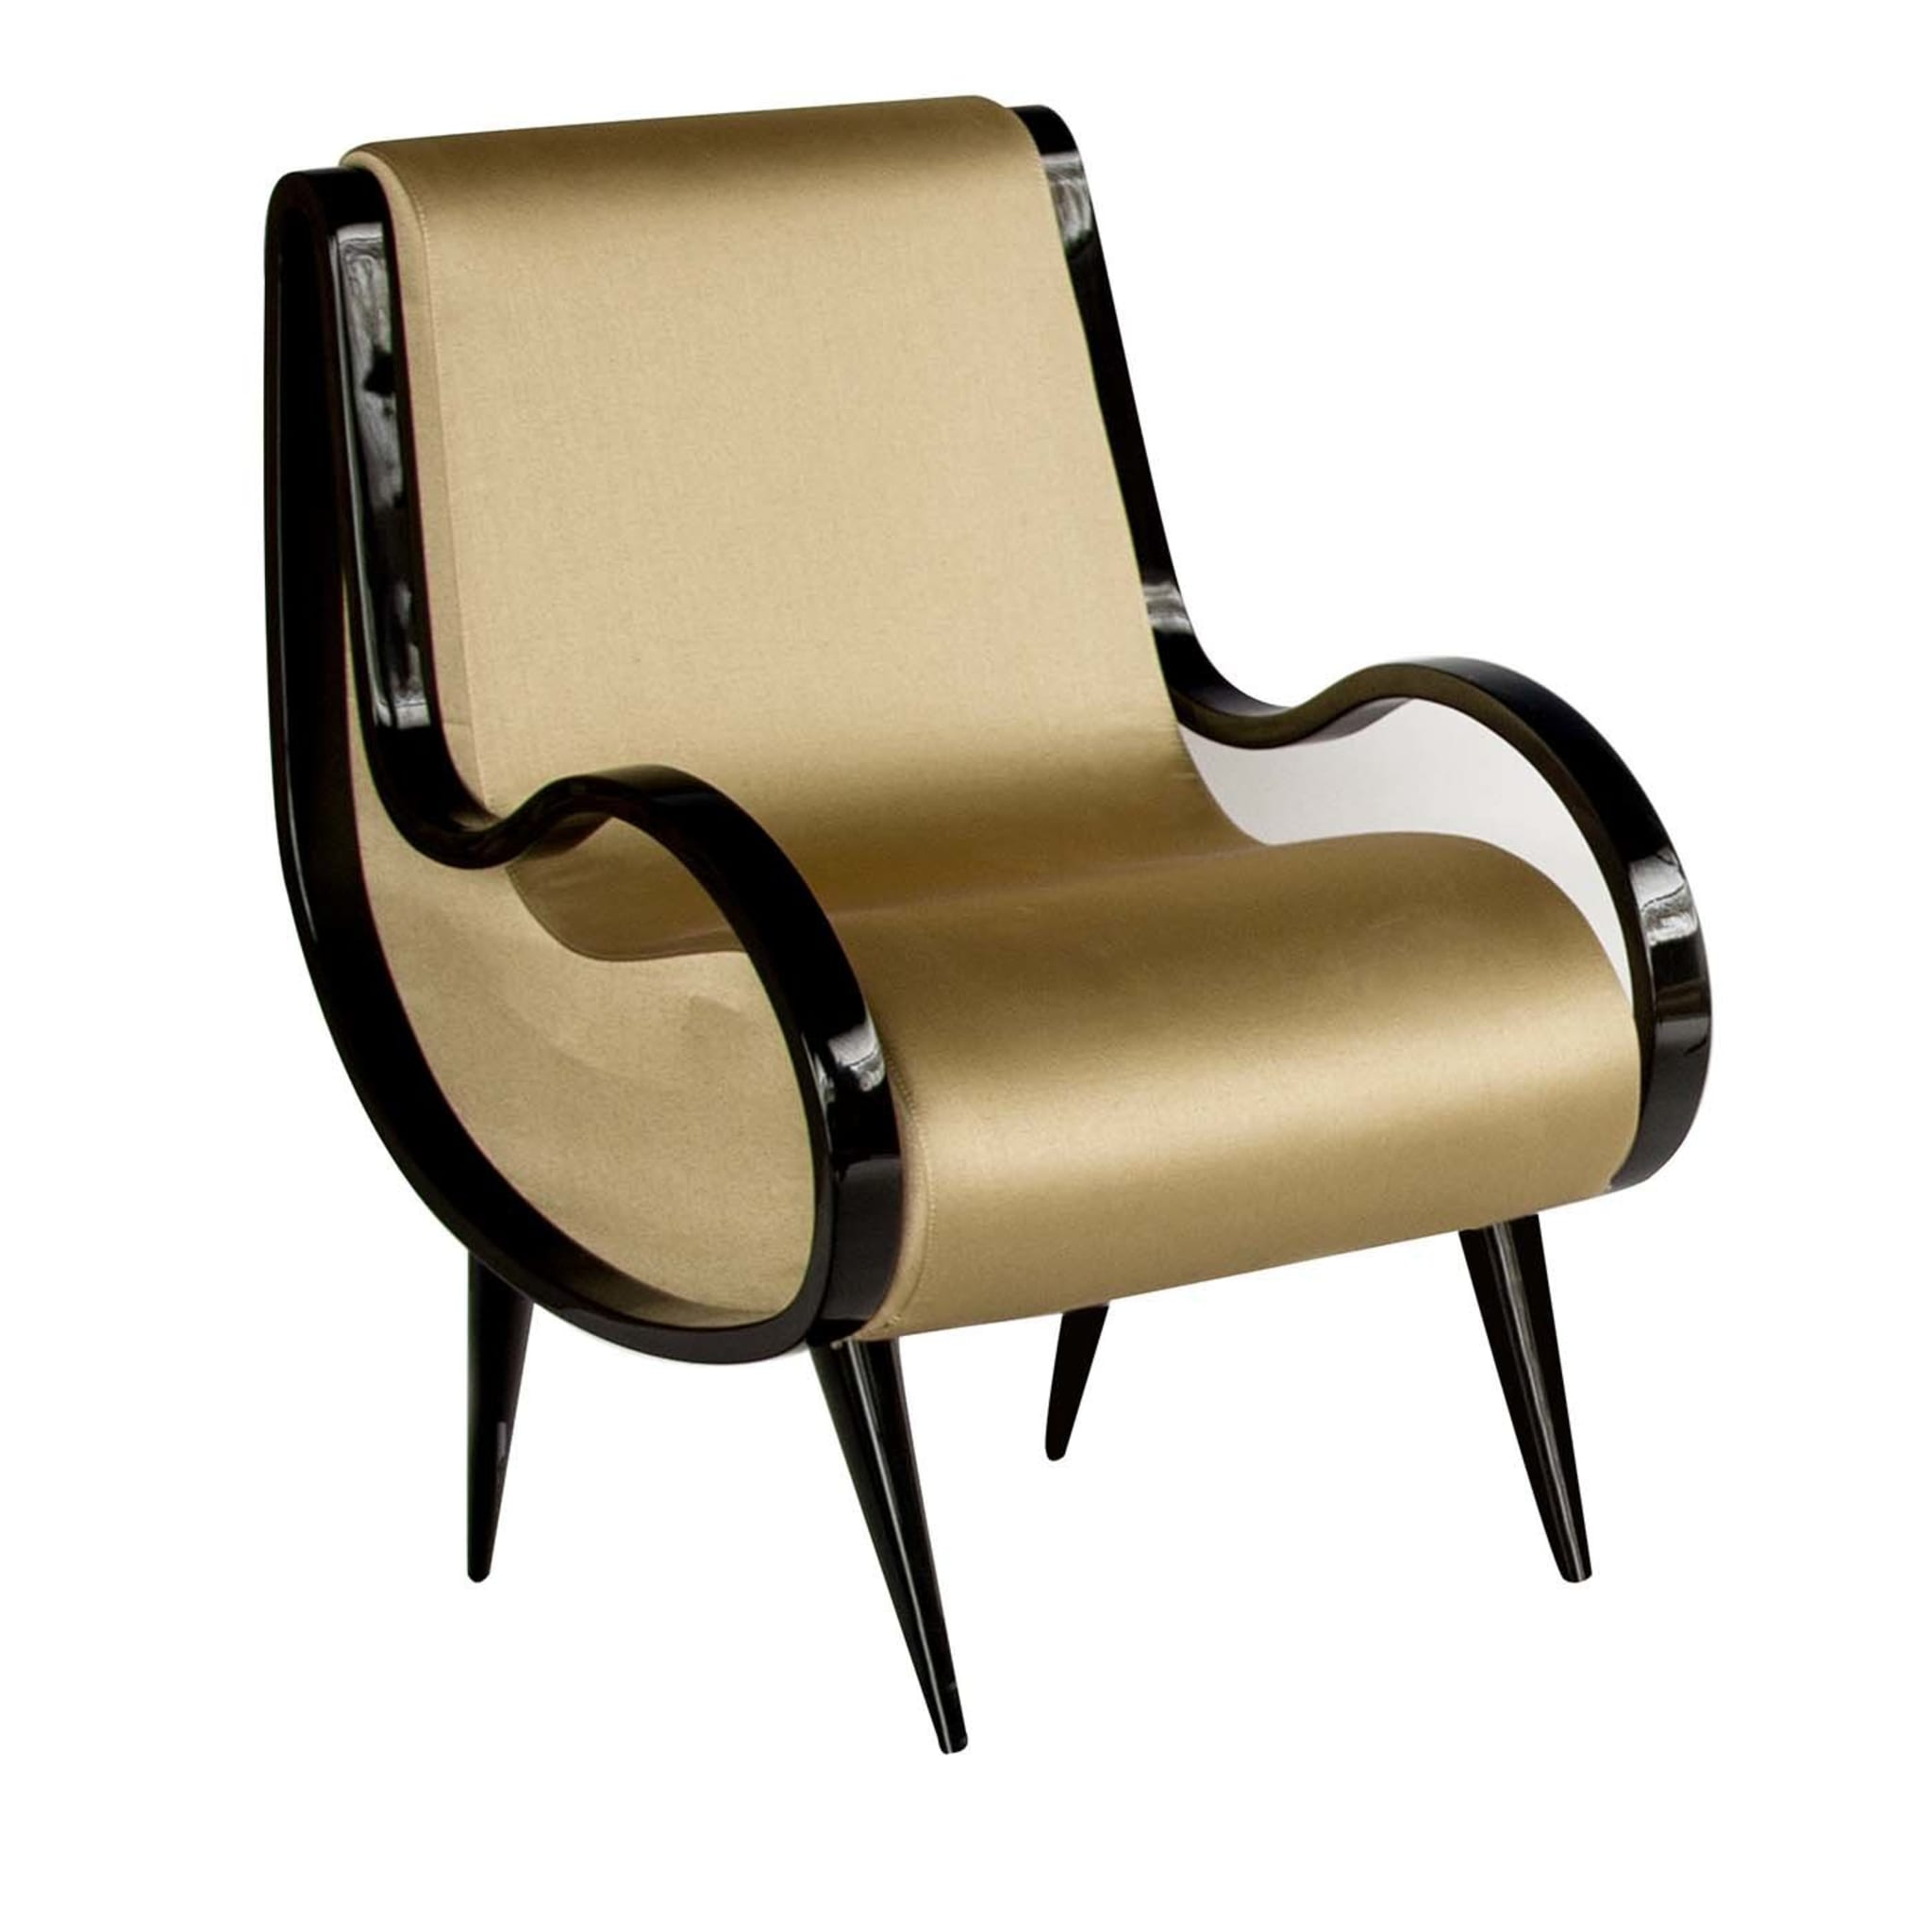 Eclipse armchair in gold fabric - Main view